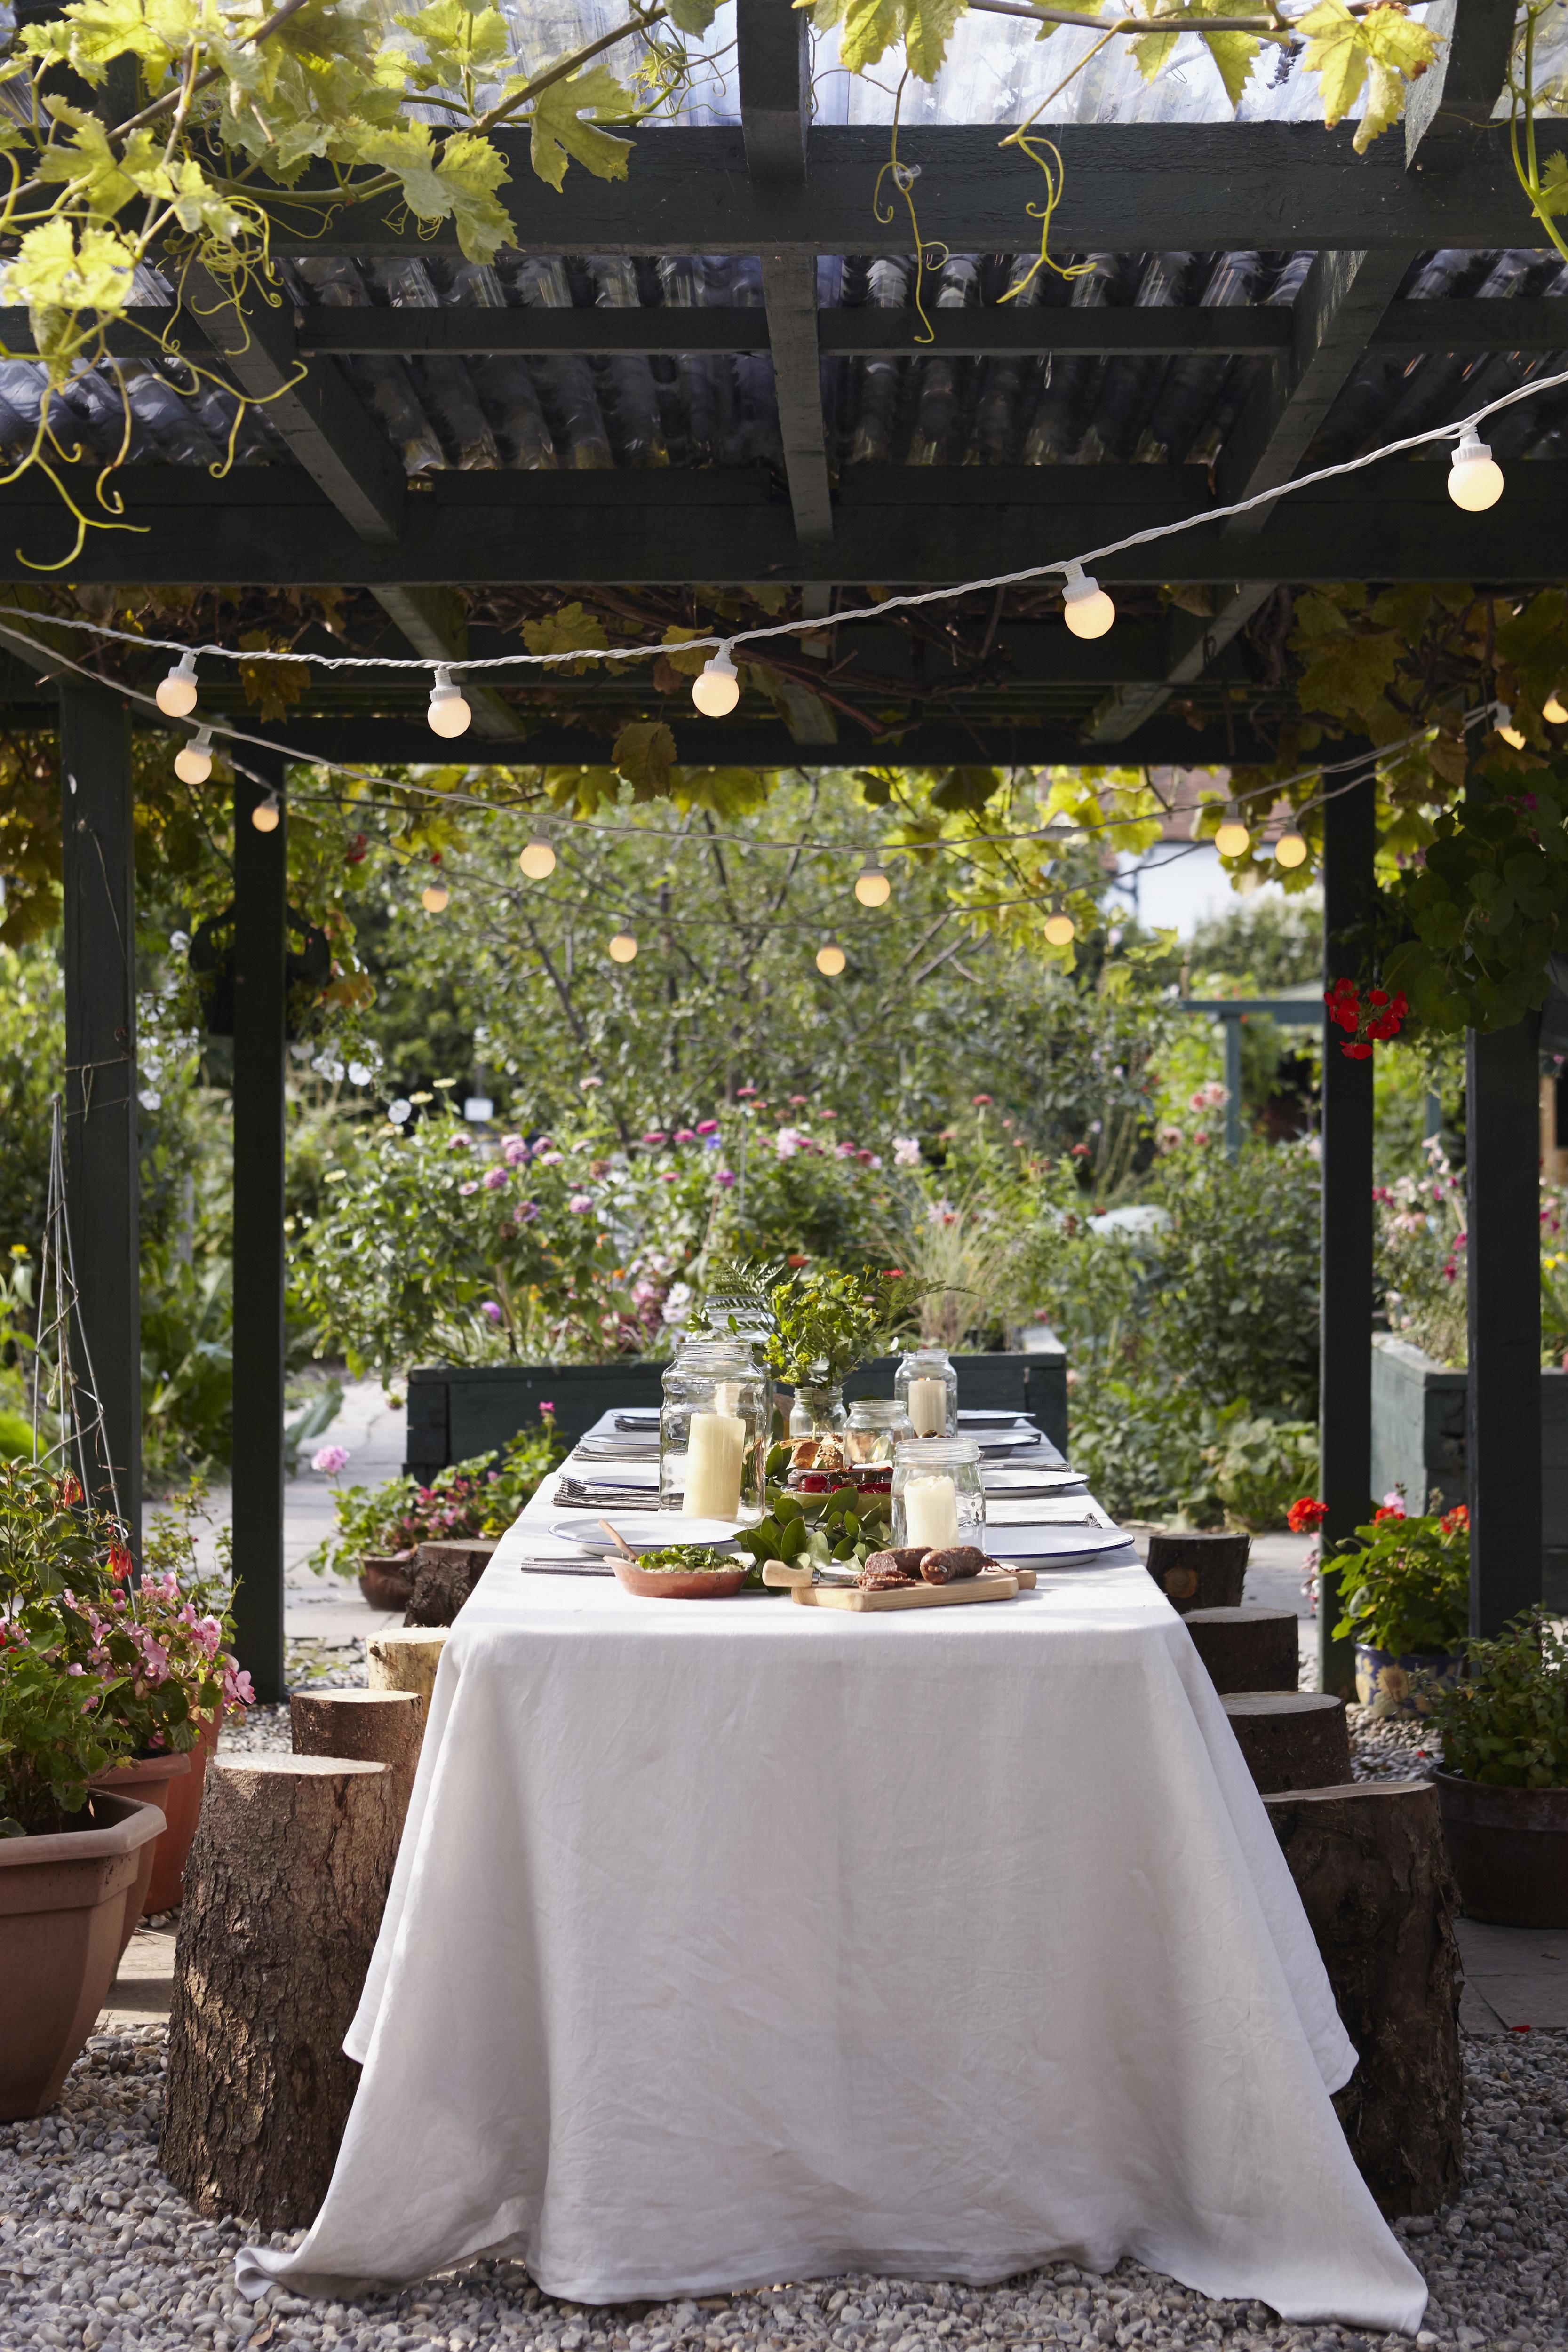 These Are the 12 Small Garden Party Ideas You Should Plan to Copy